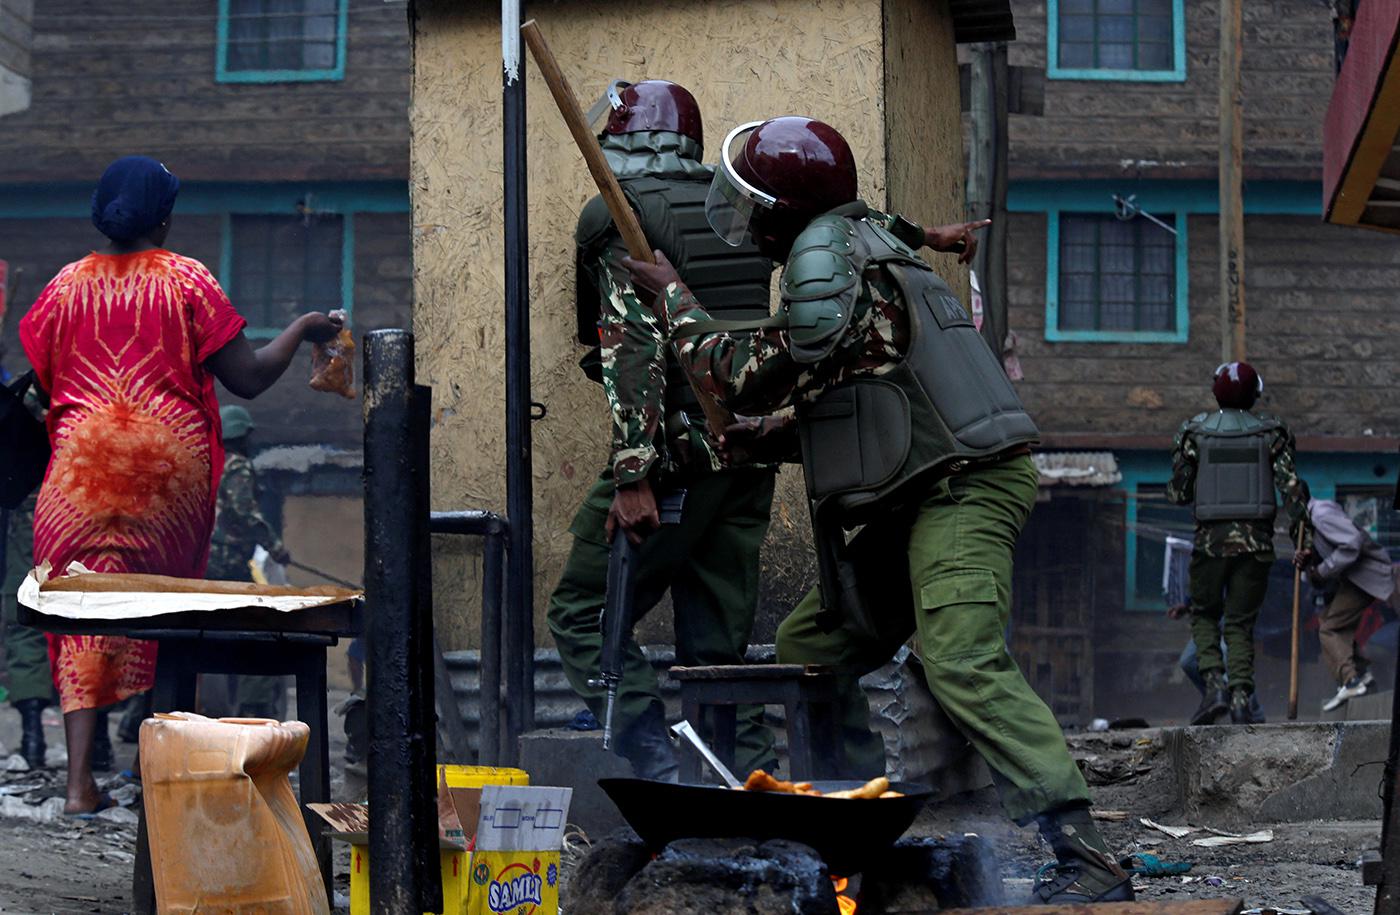 Residents flee as anti-riot policemen pursue opposition protestors in Mathare, Nairobi, on August 12.